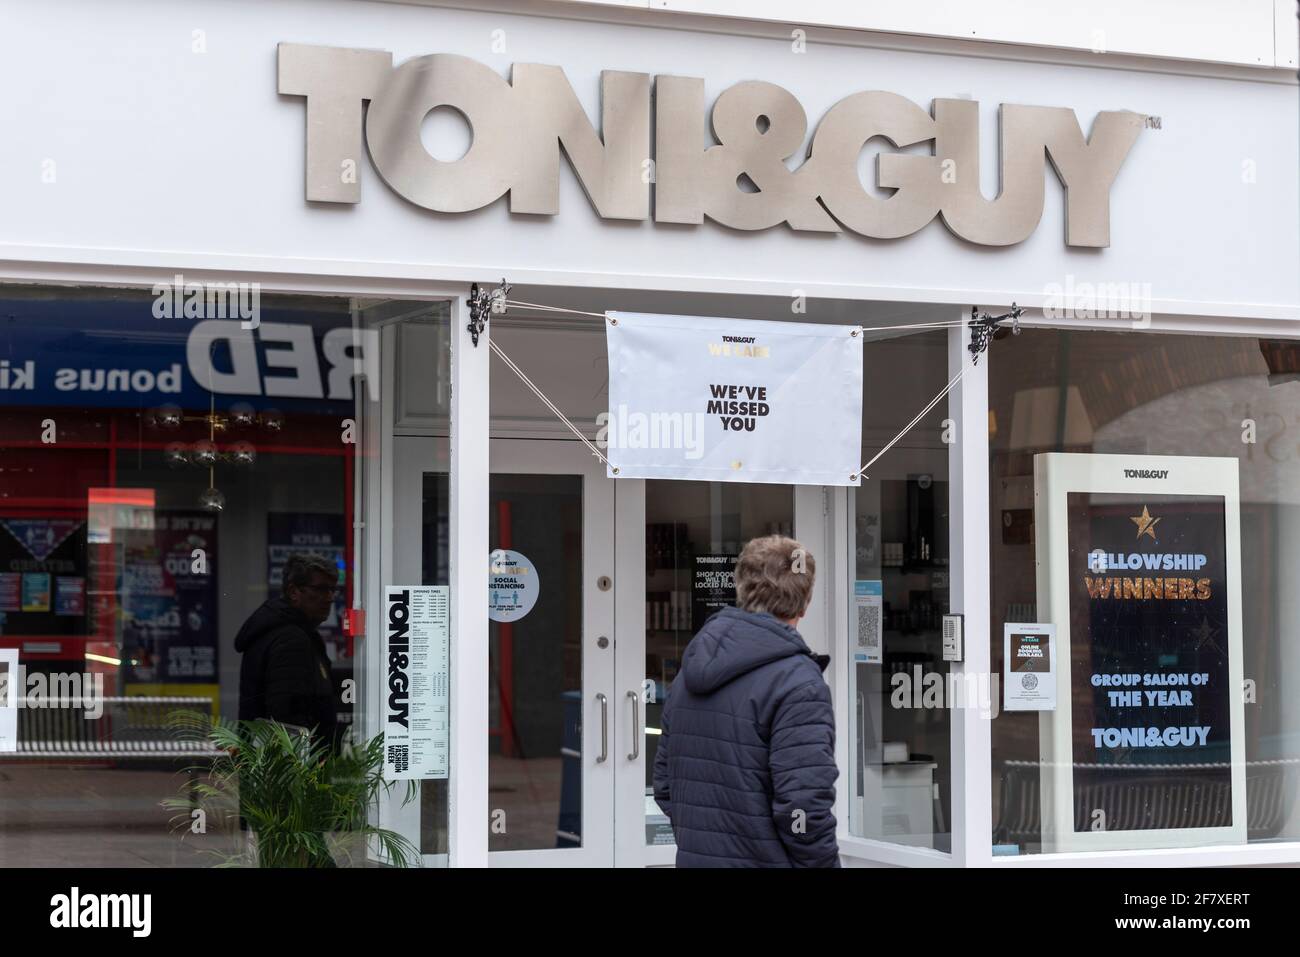 Toni & Guy hair salon in the High Street of Southend on Sea, Essex, UK, with a sign welcoming back customers on 12 April after COVID 19 lockdown Stock Photo